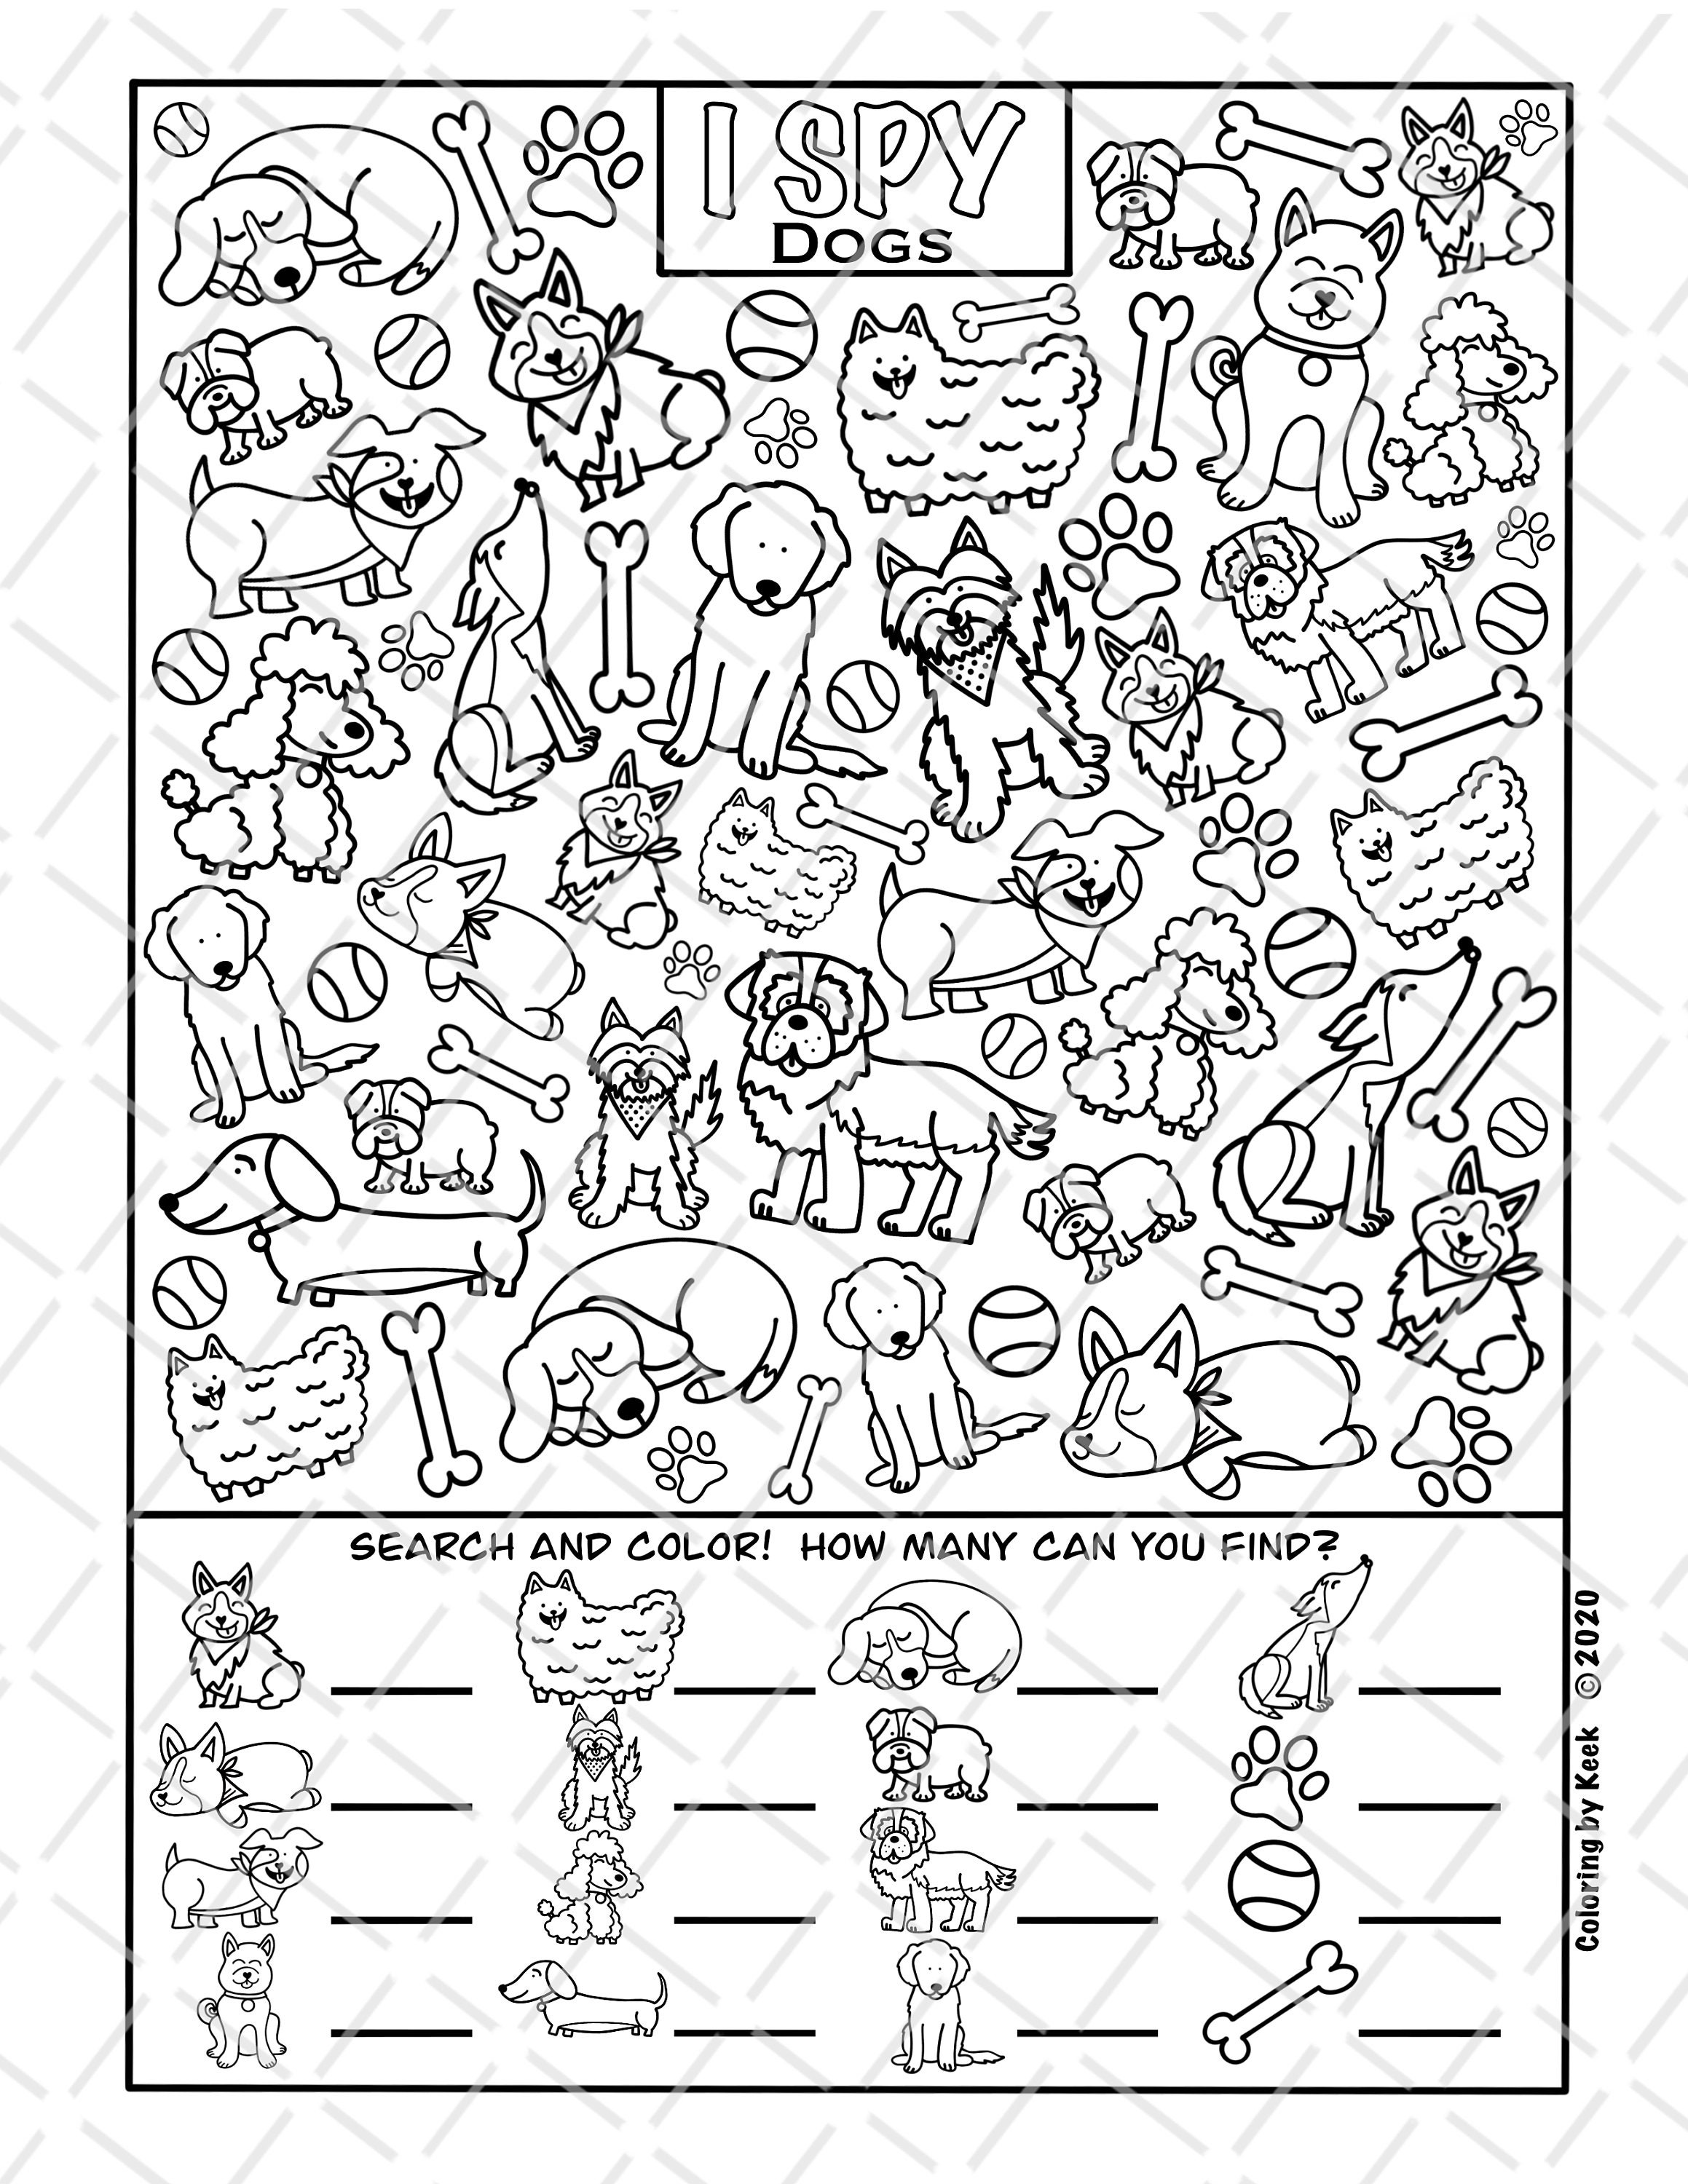 i-spy-dogs-coloring-page-printout-download-colouring-search-etsy